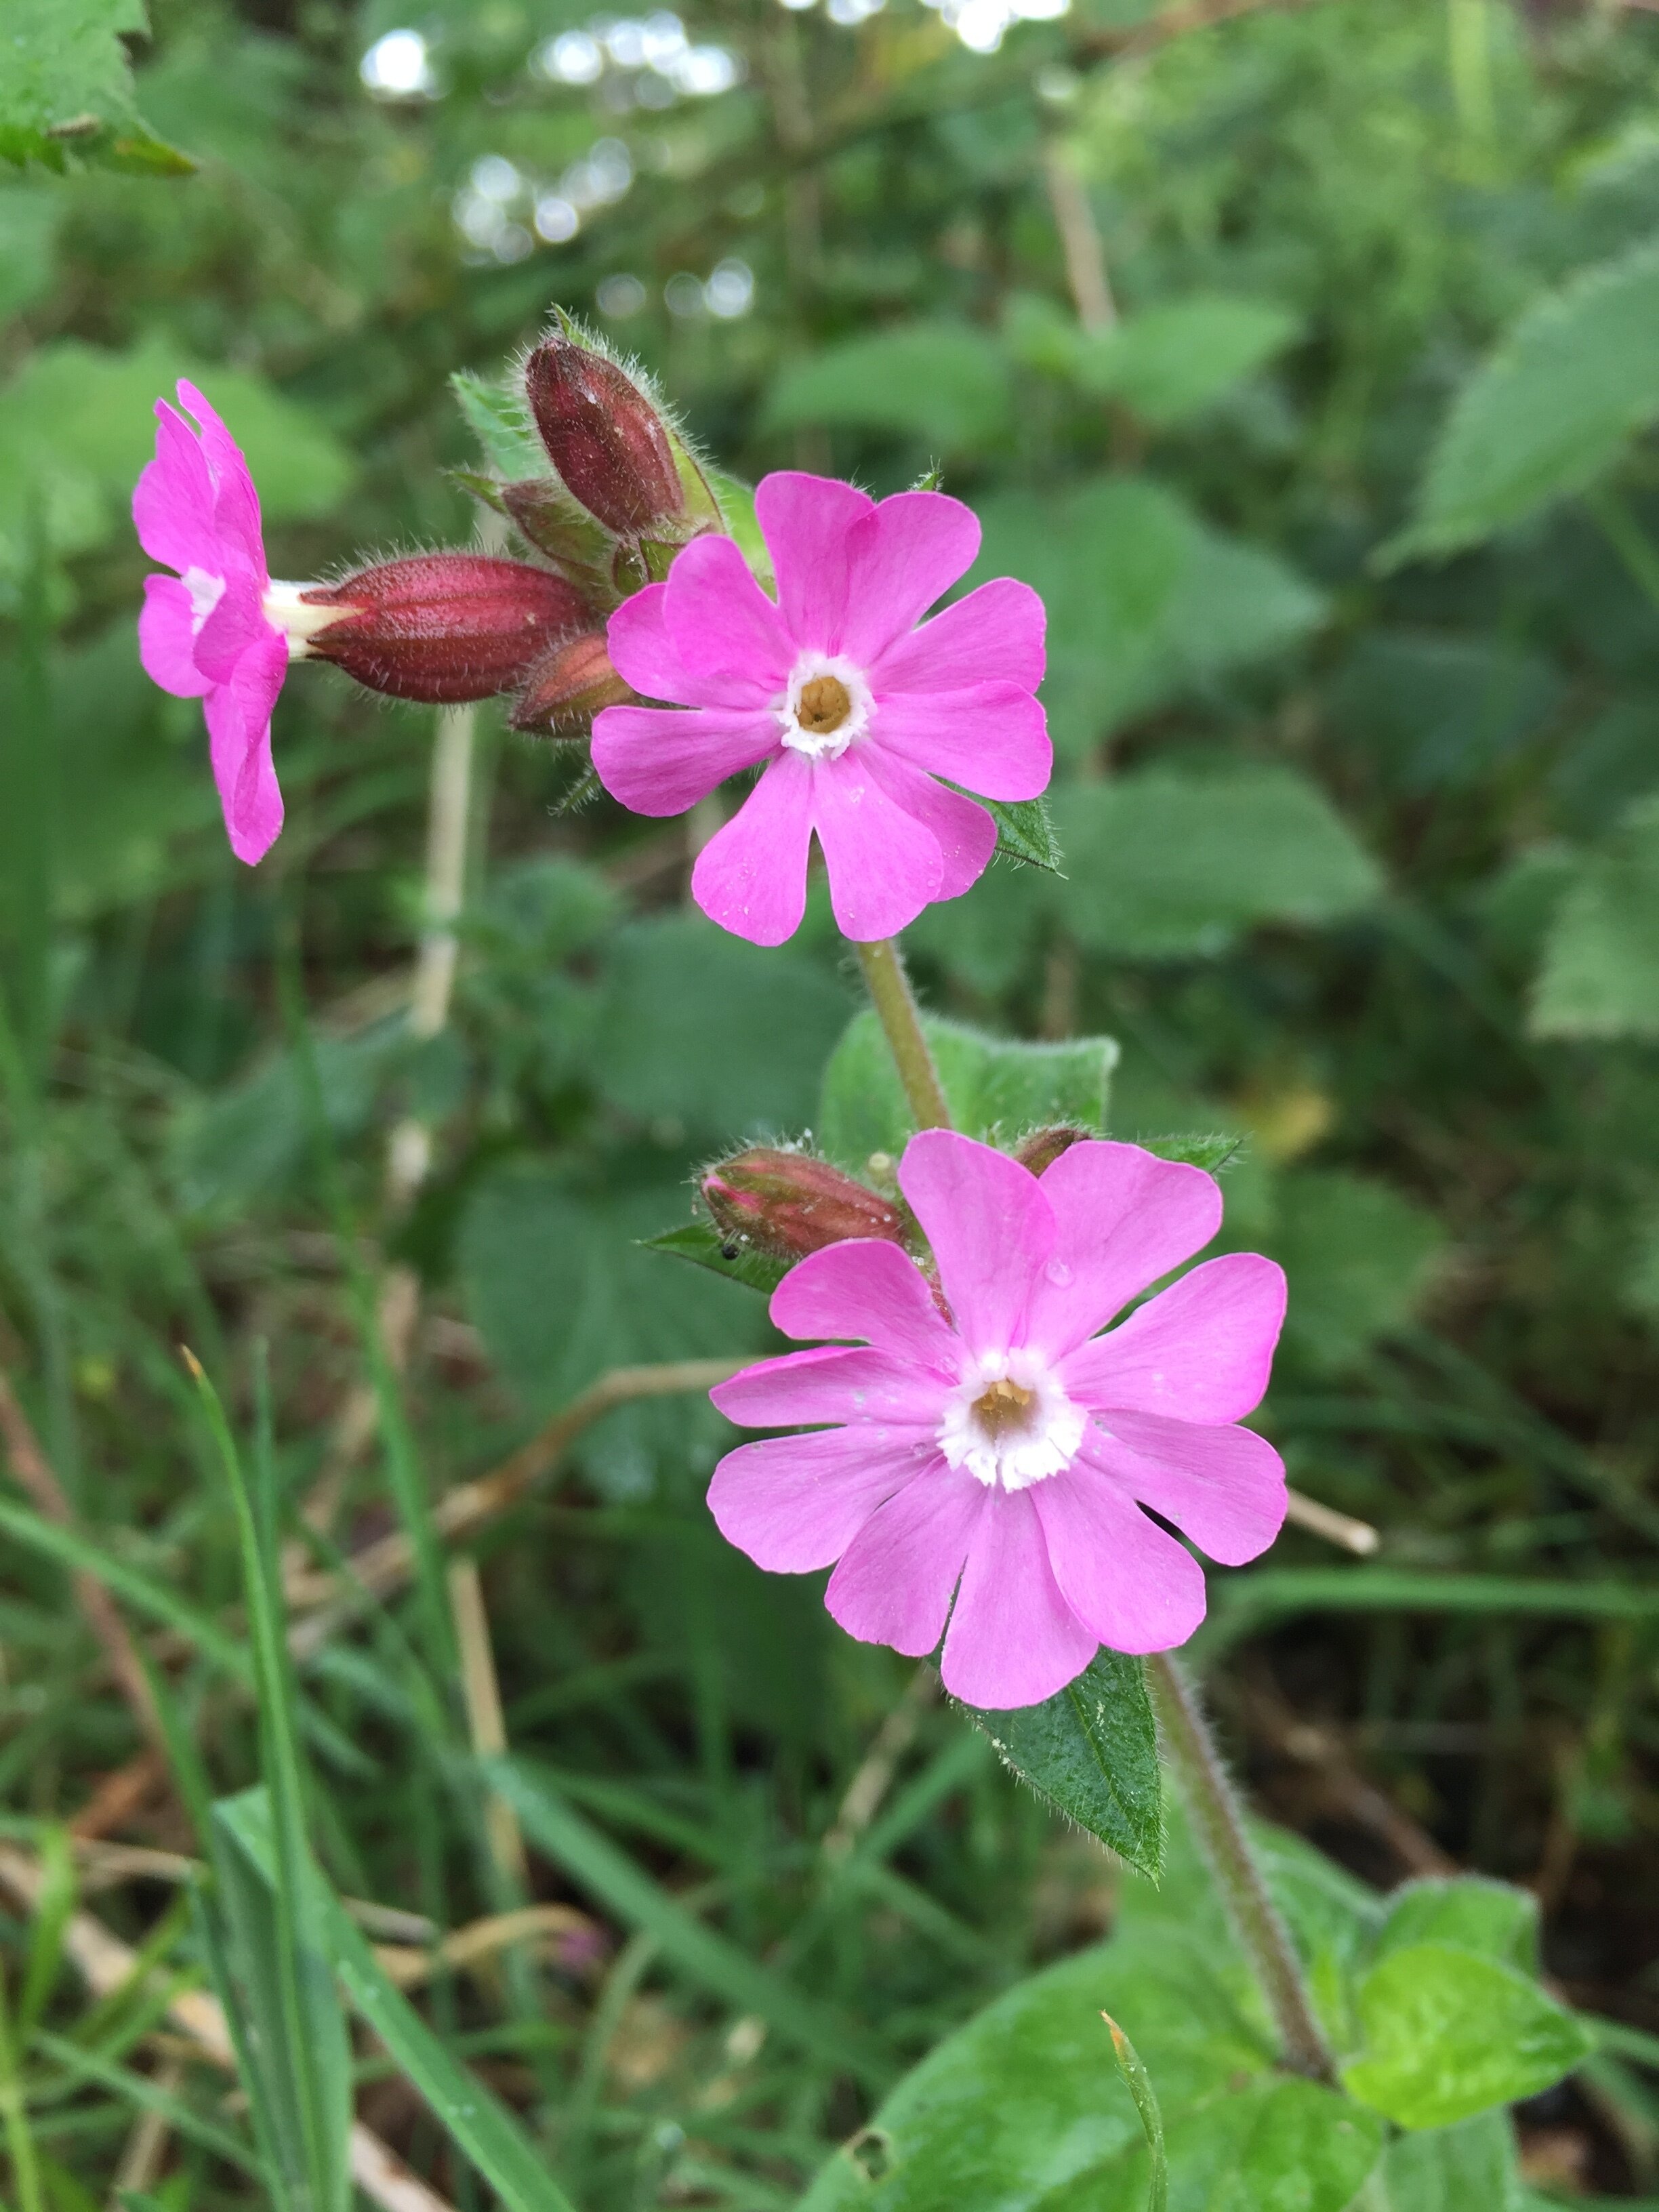 Red campion, Silene dioica